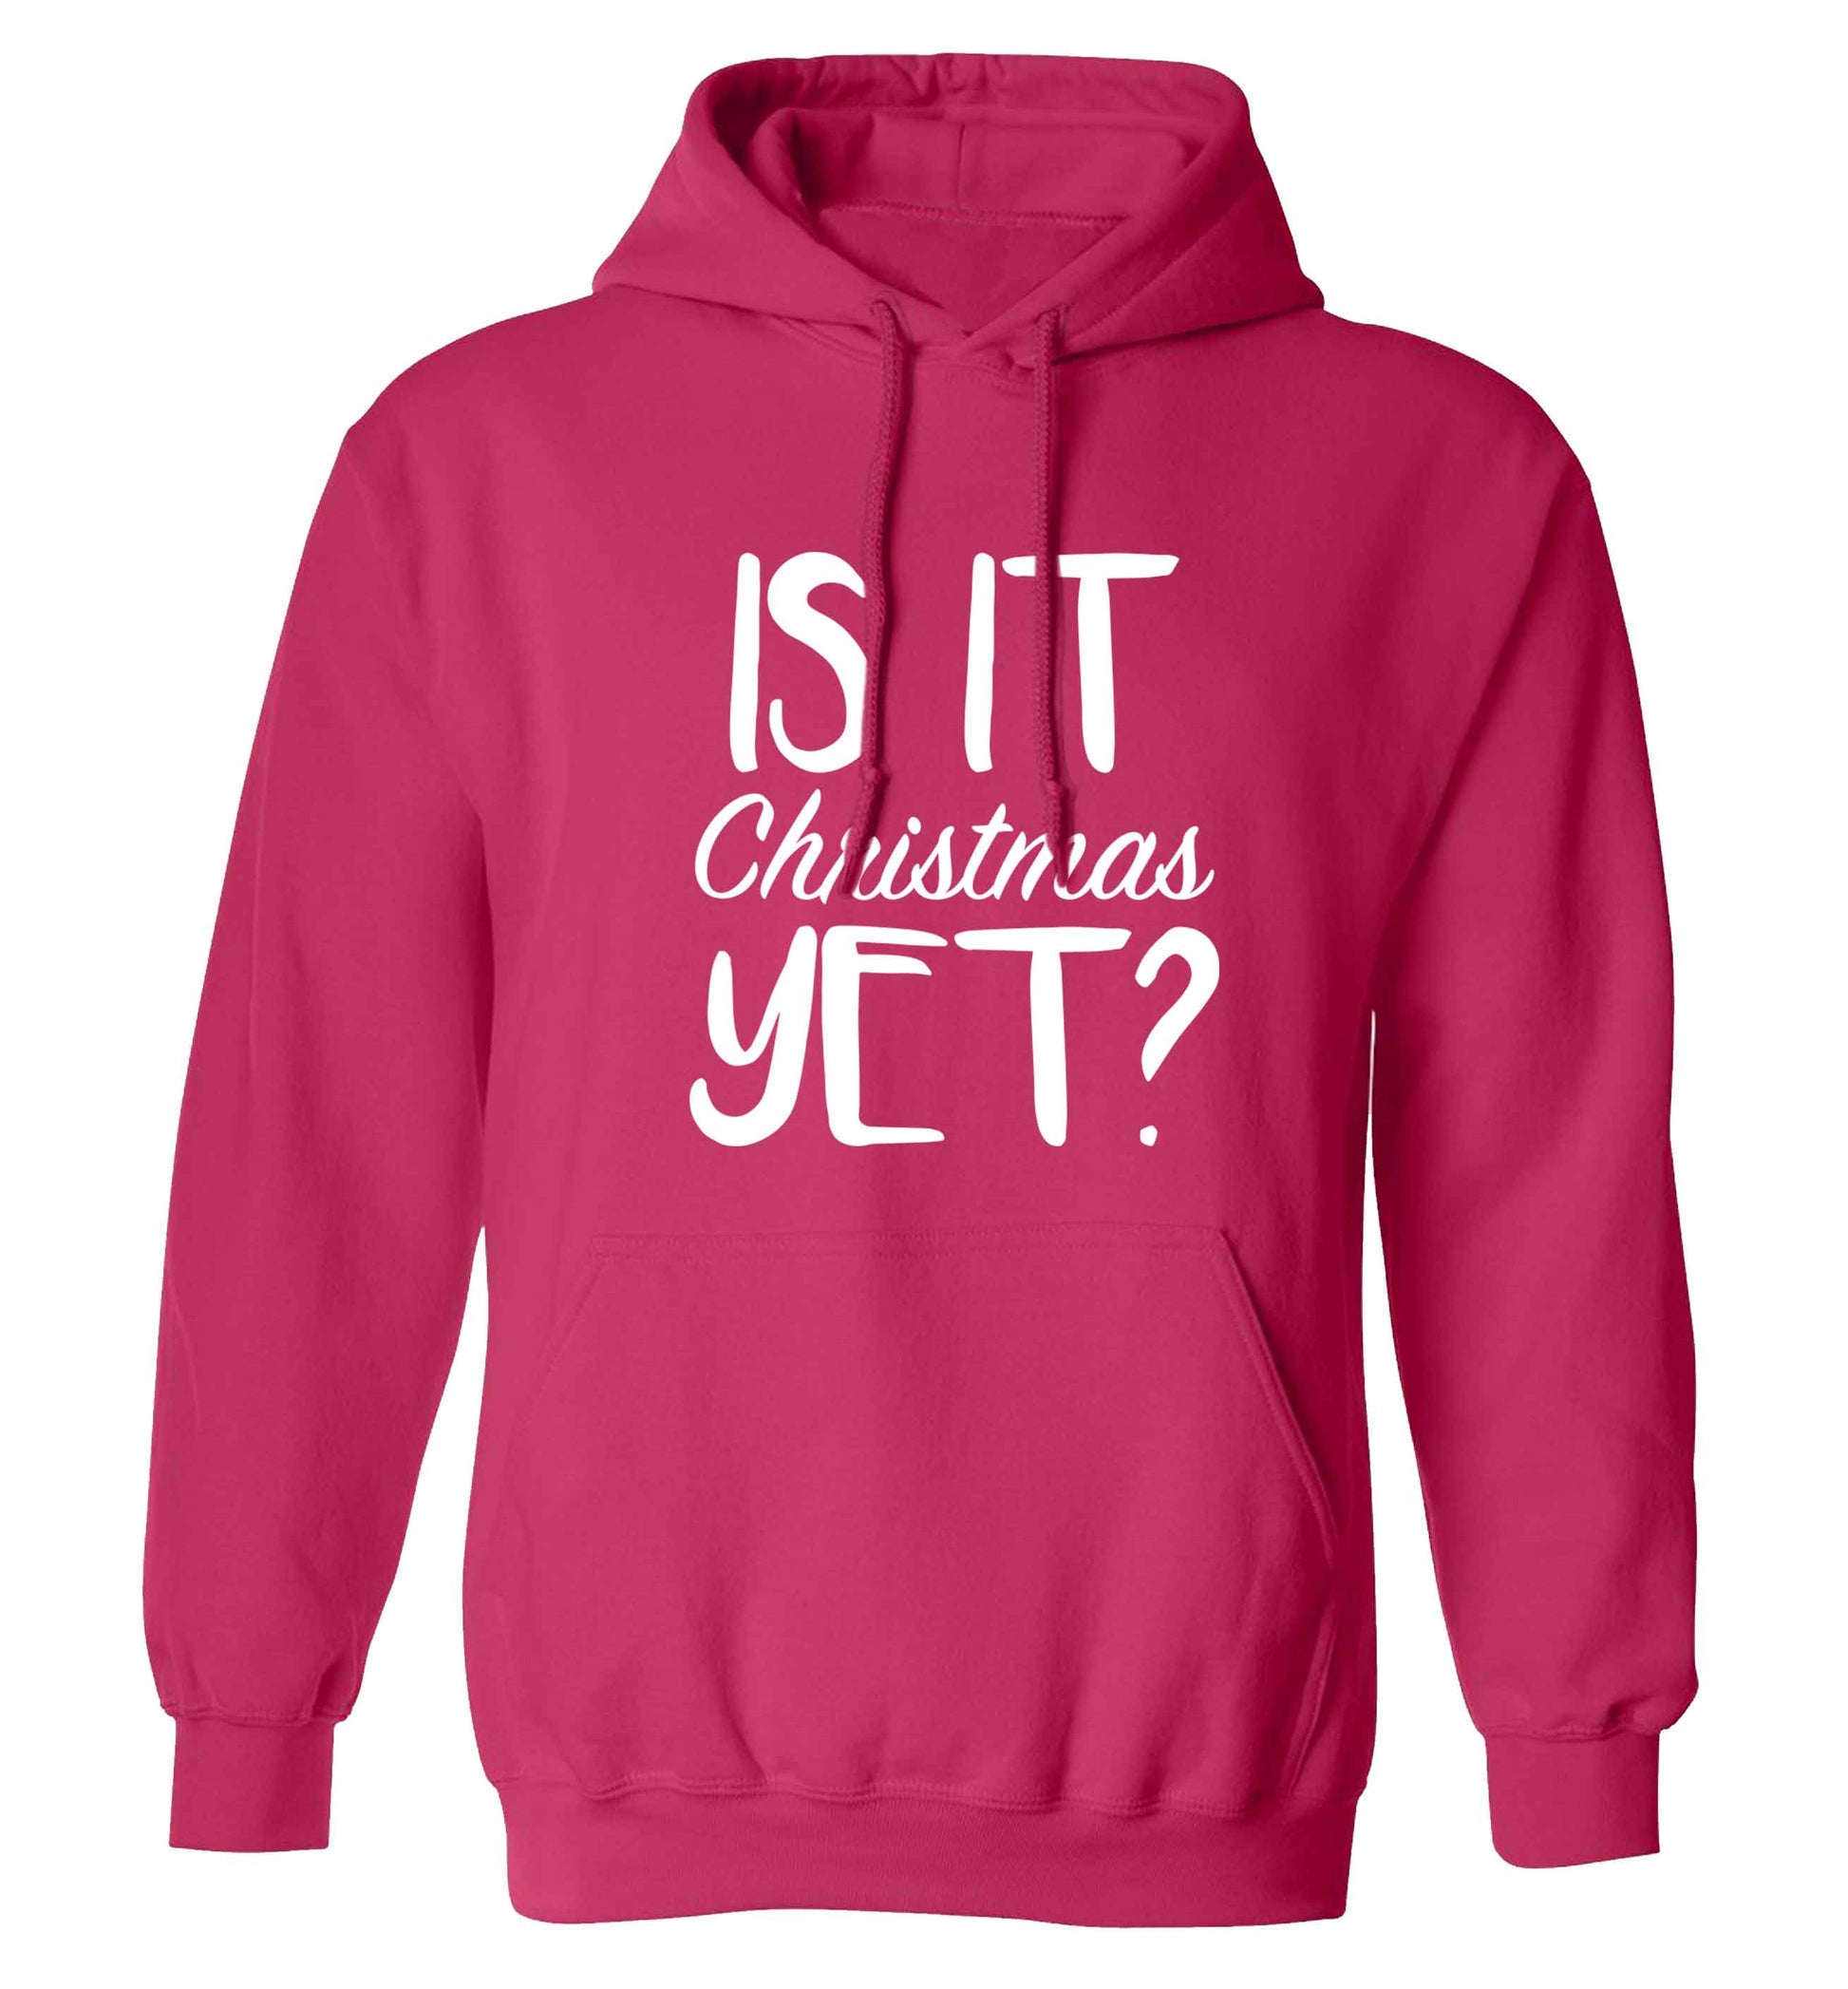 Is it Christmas yet? adults unisex pink hoodie 2XL